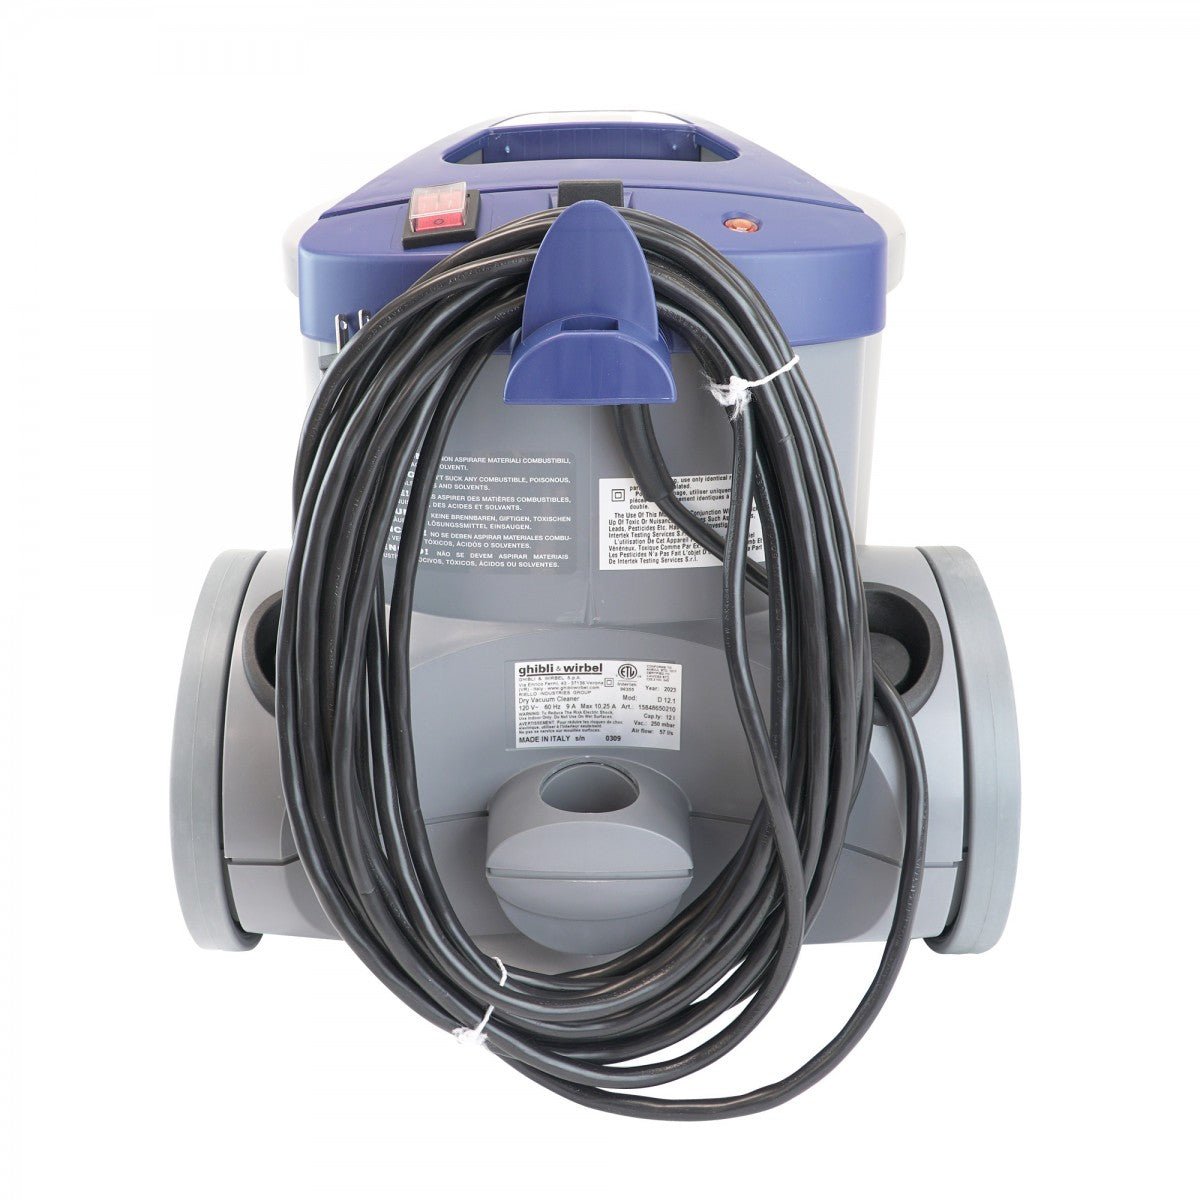 Johnny Vac / Ghibli AS6 Canister Commercial Vacuum D12 - Vacuums